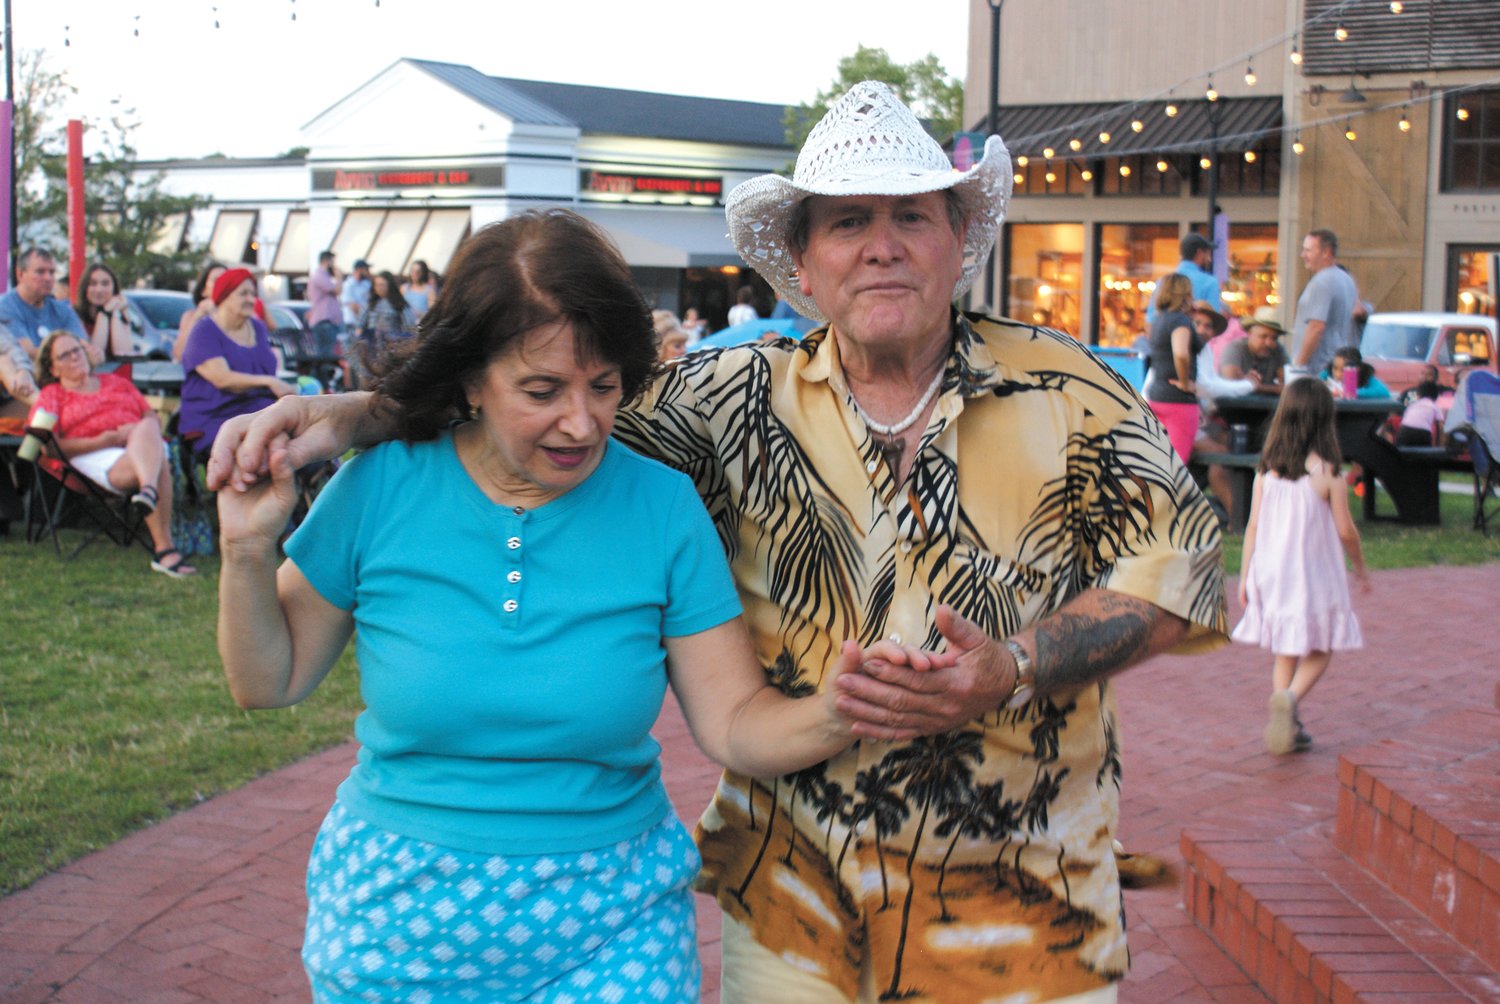 JUST KEEP DANCING: Dancing all night were J.D. Mystery and Doreen. They danced around the Garden City Gazebo throughout the entire concert.